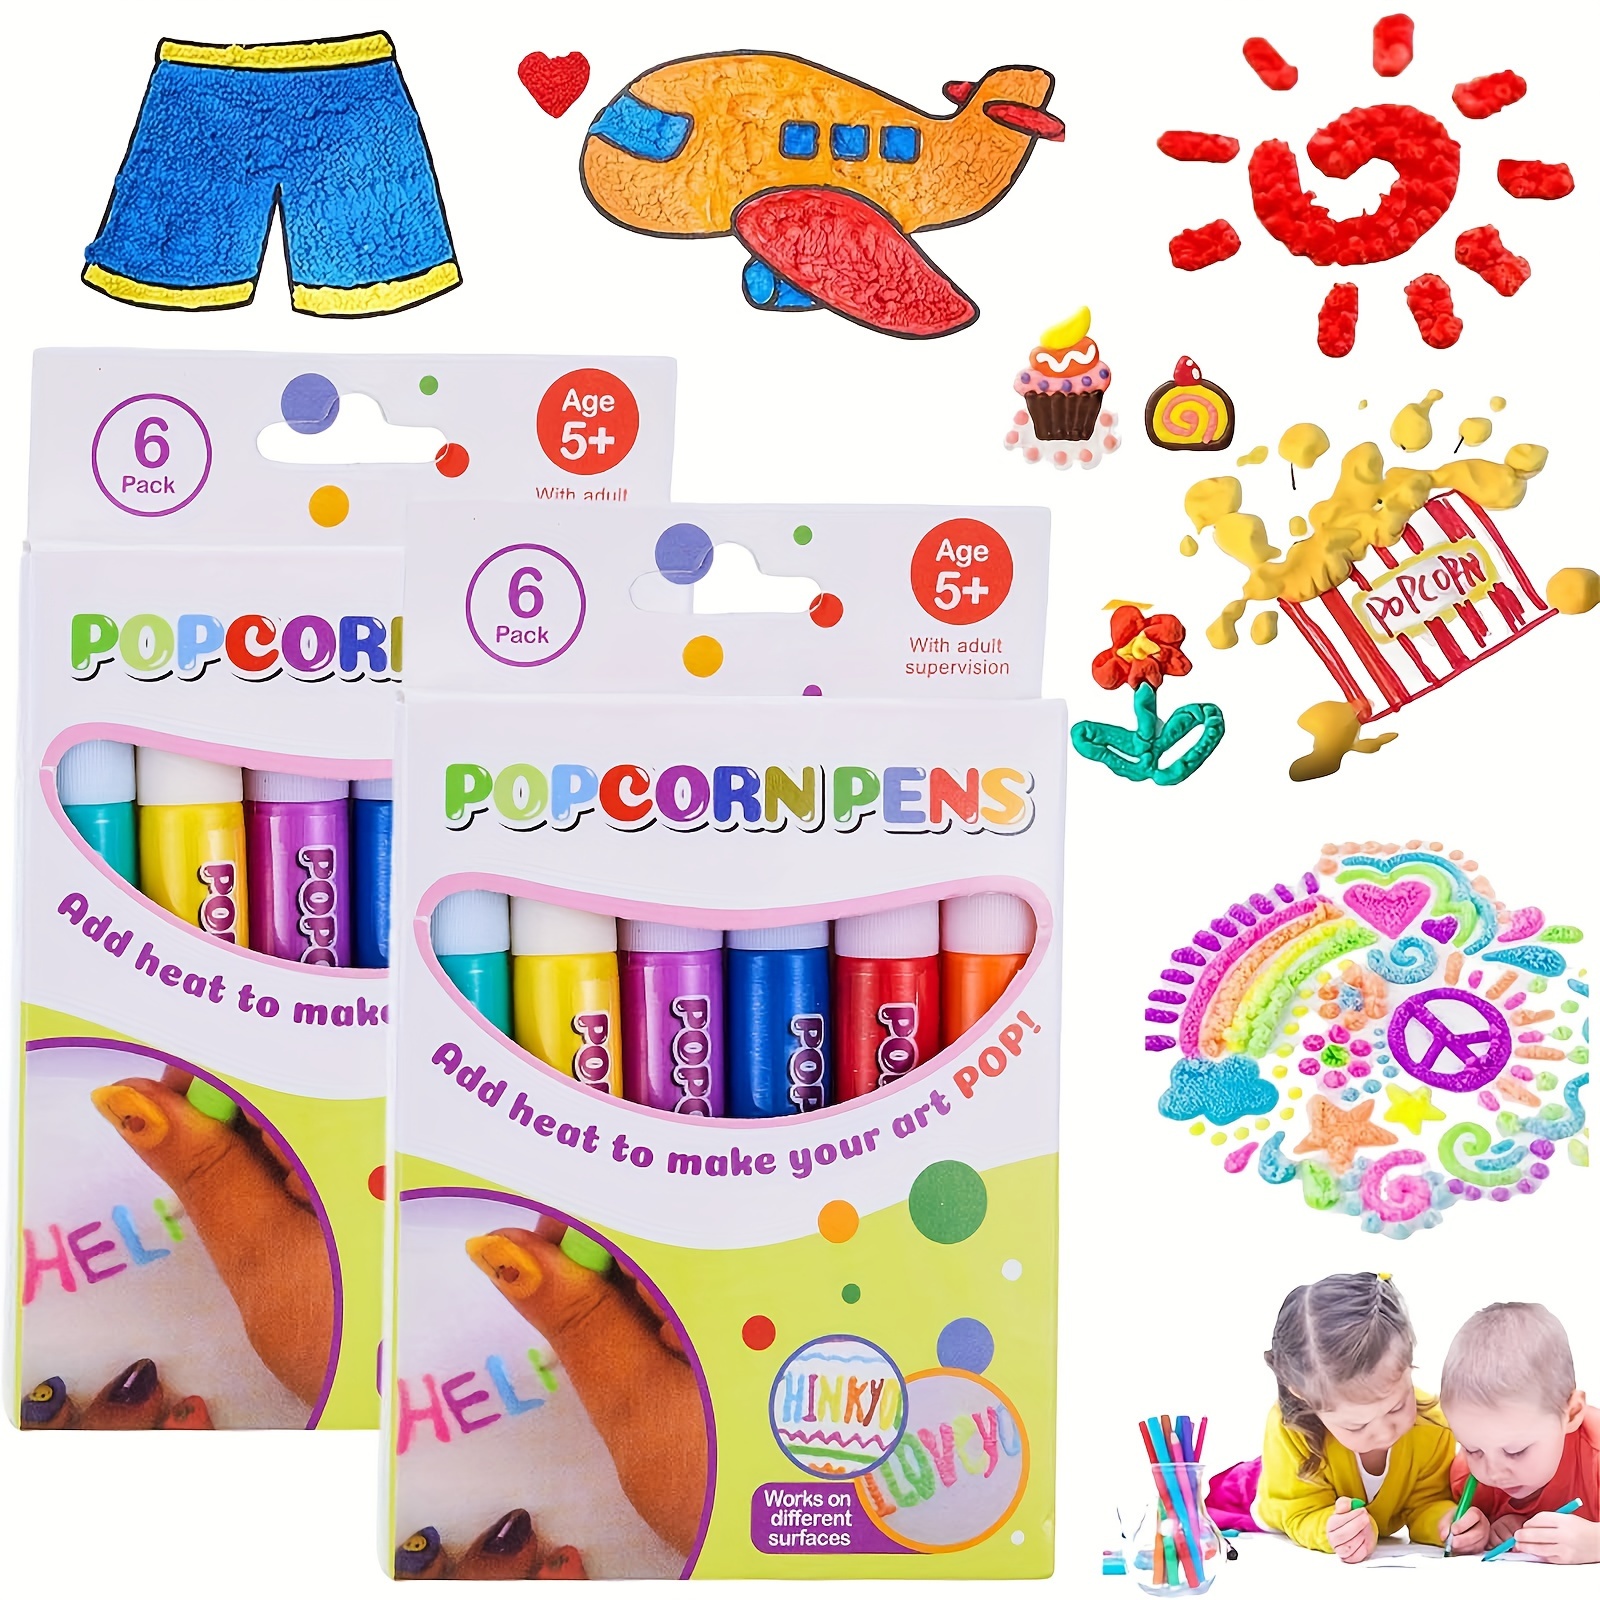 3D Magic Popcorn Pens Puffy Paint Bubble Pen For Greeting Birthday